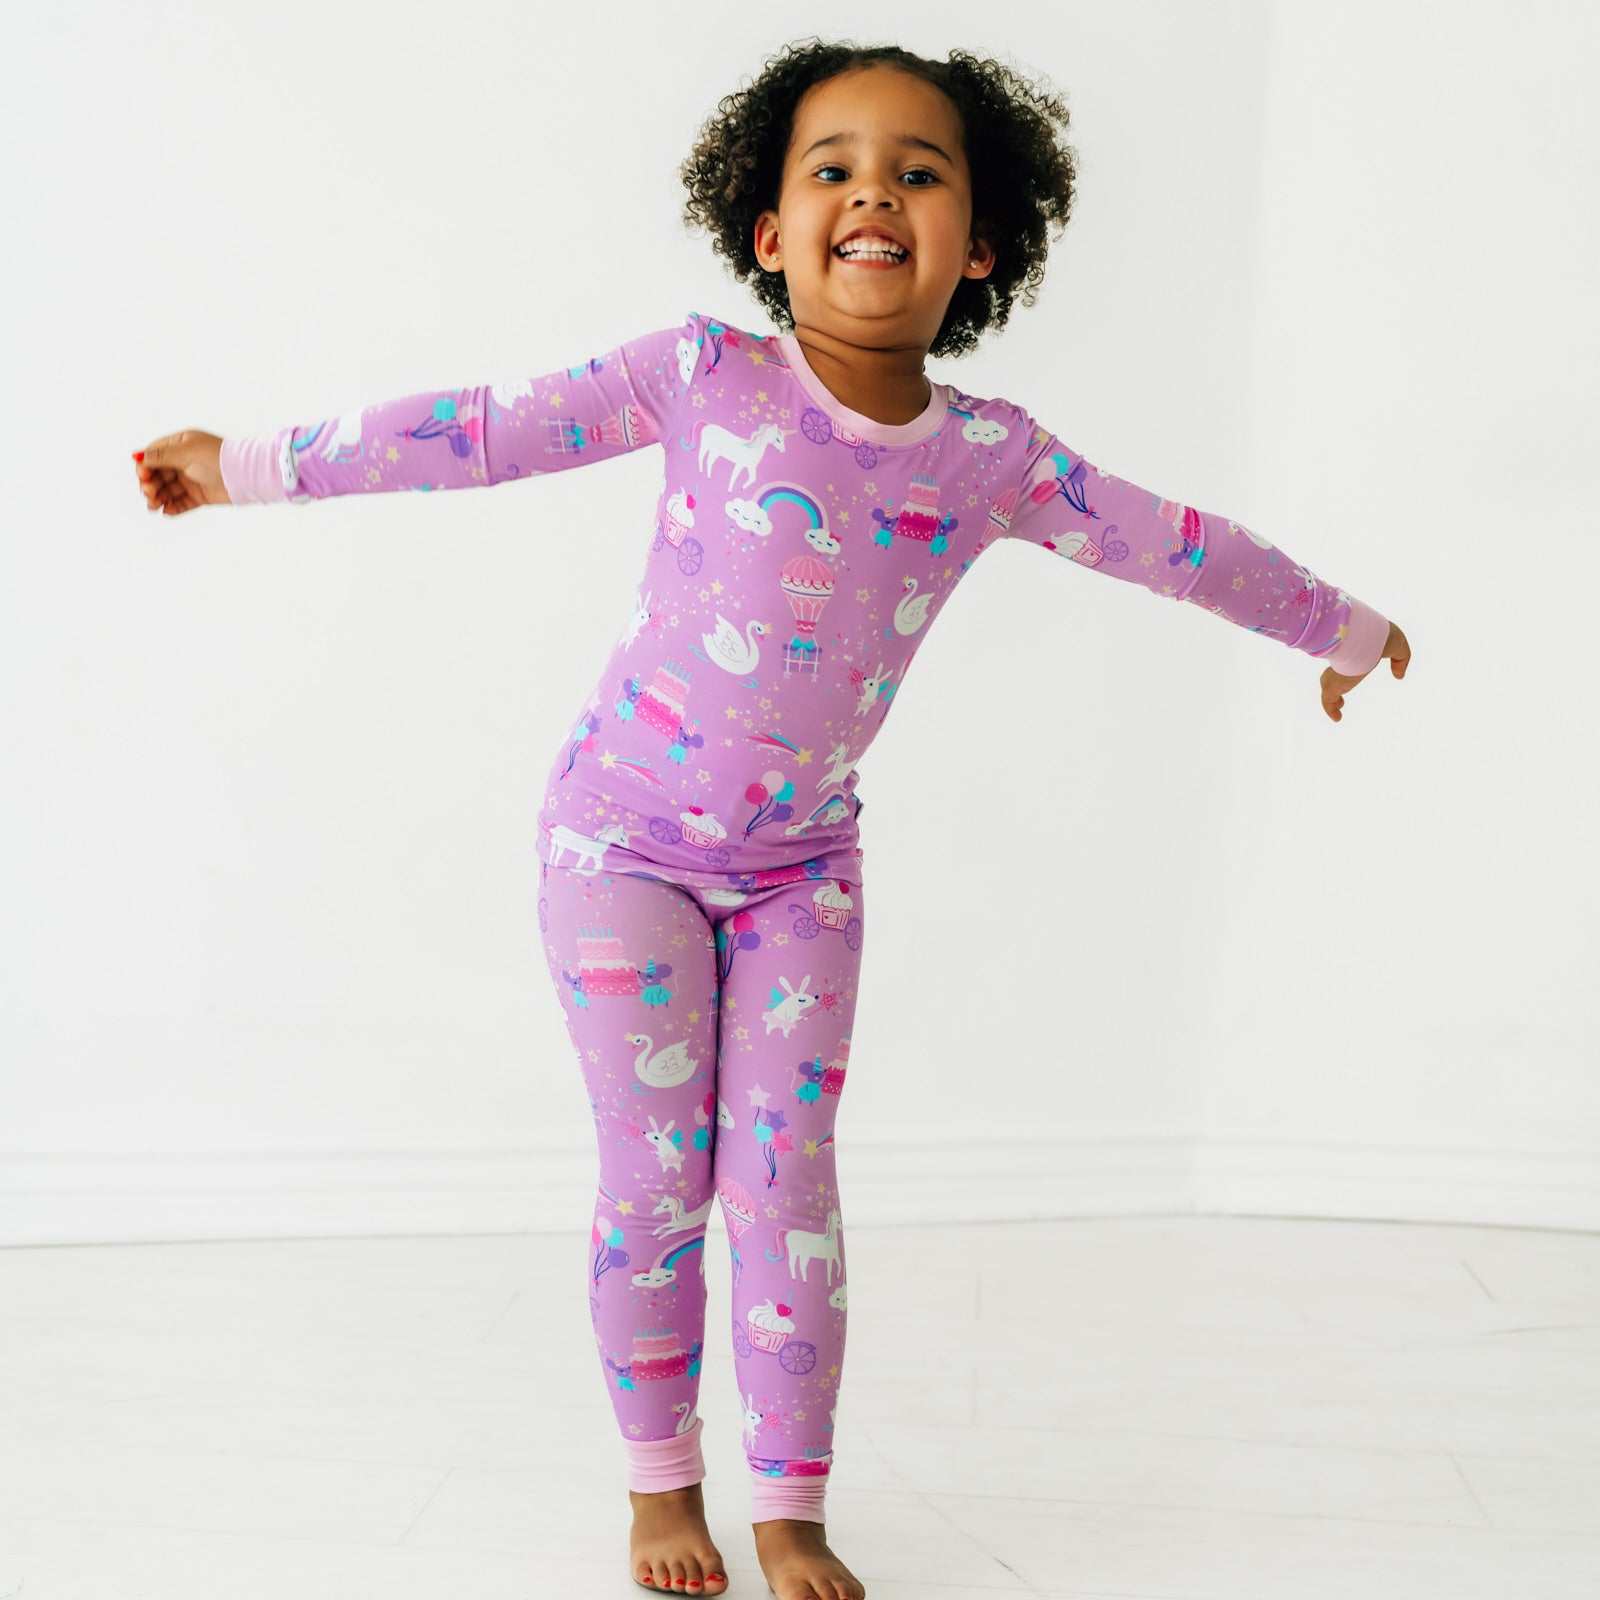 Child playing wearing a Magical Birthday two piece pj set